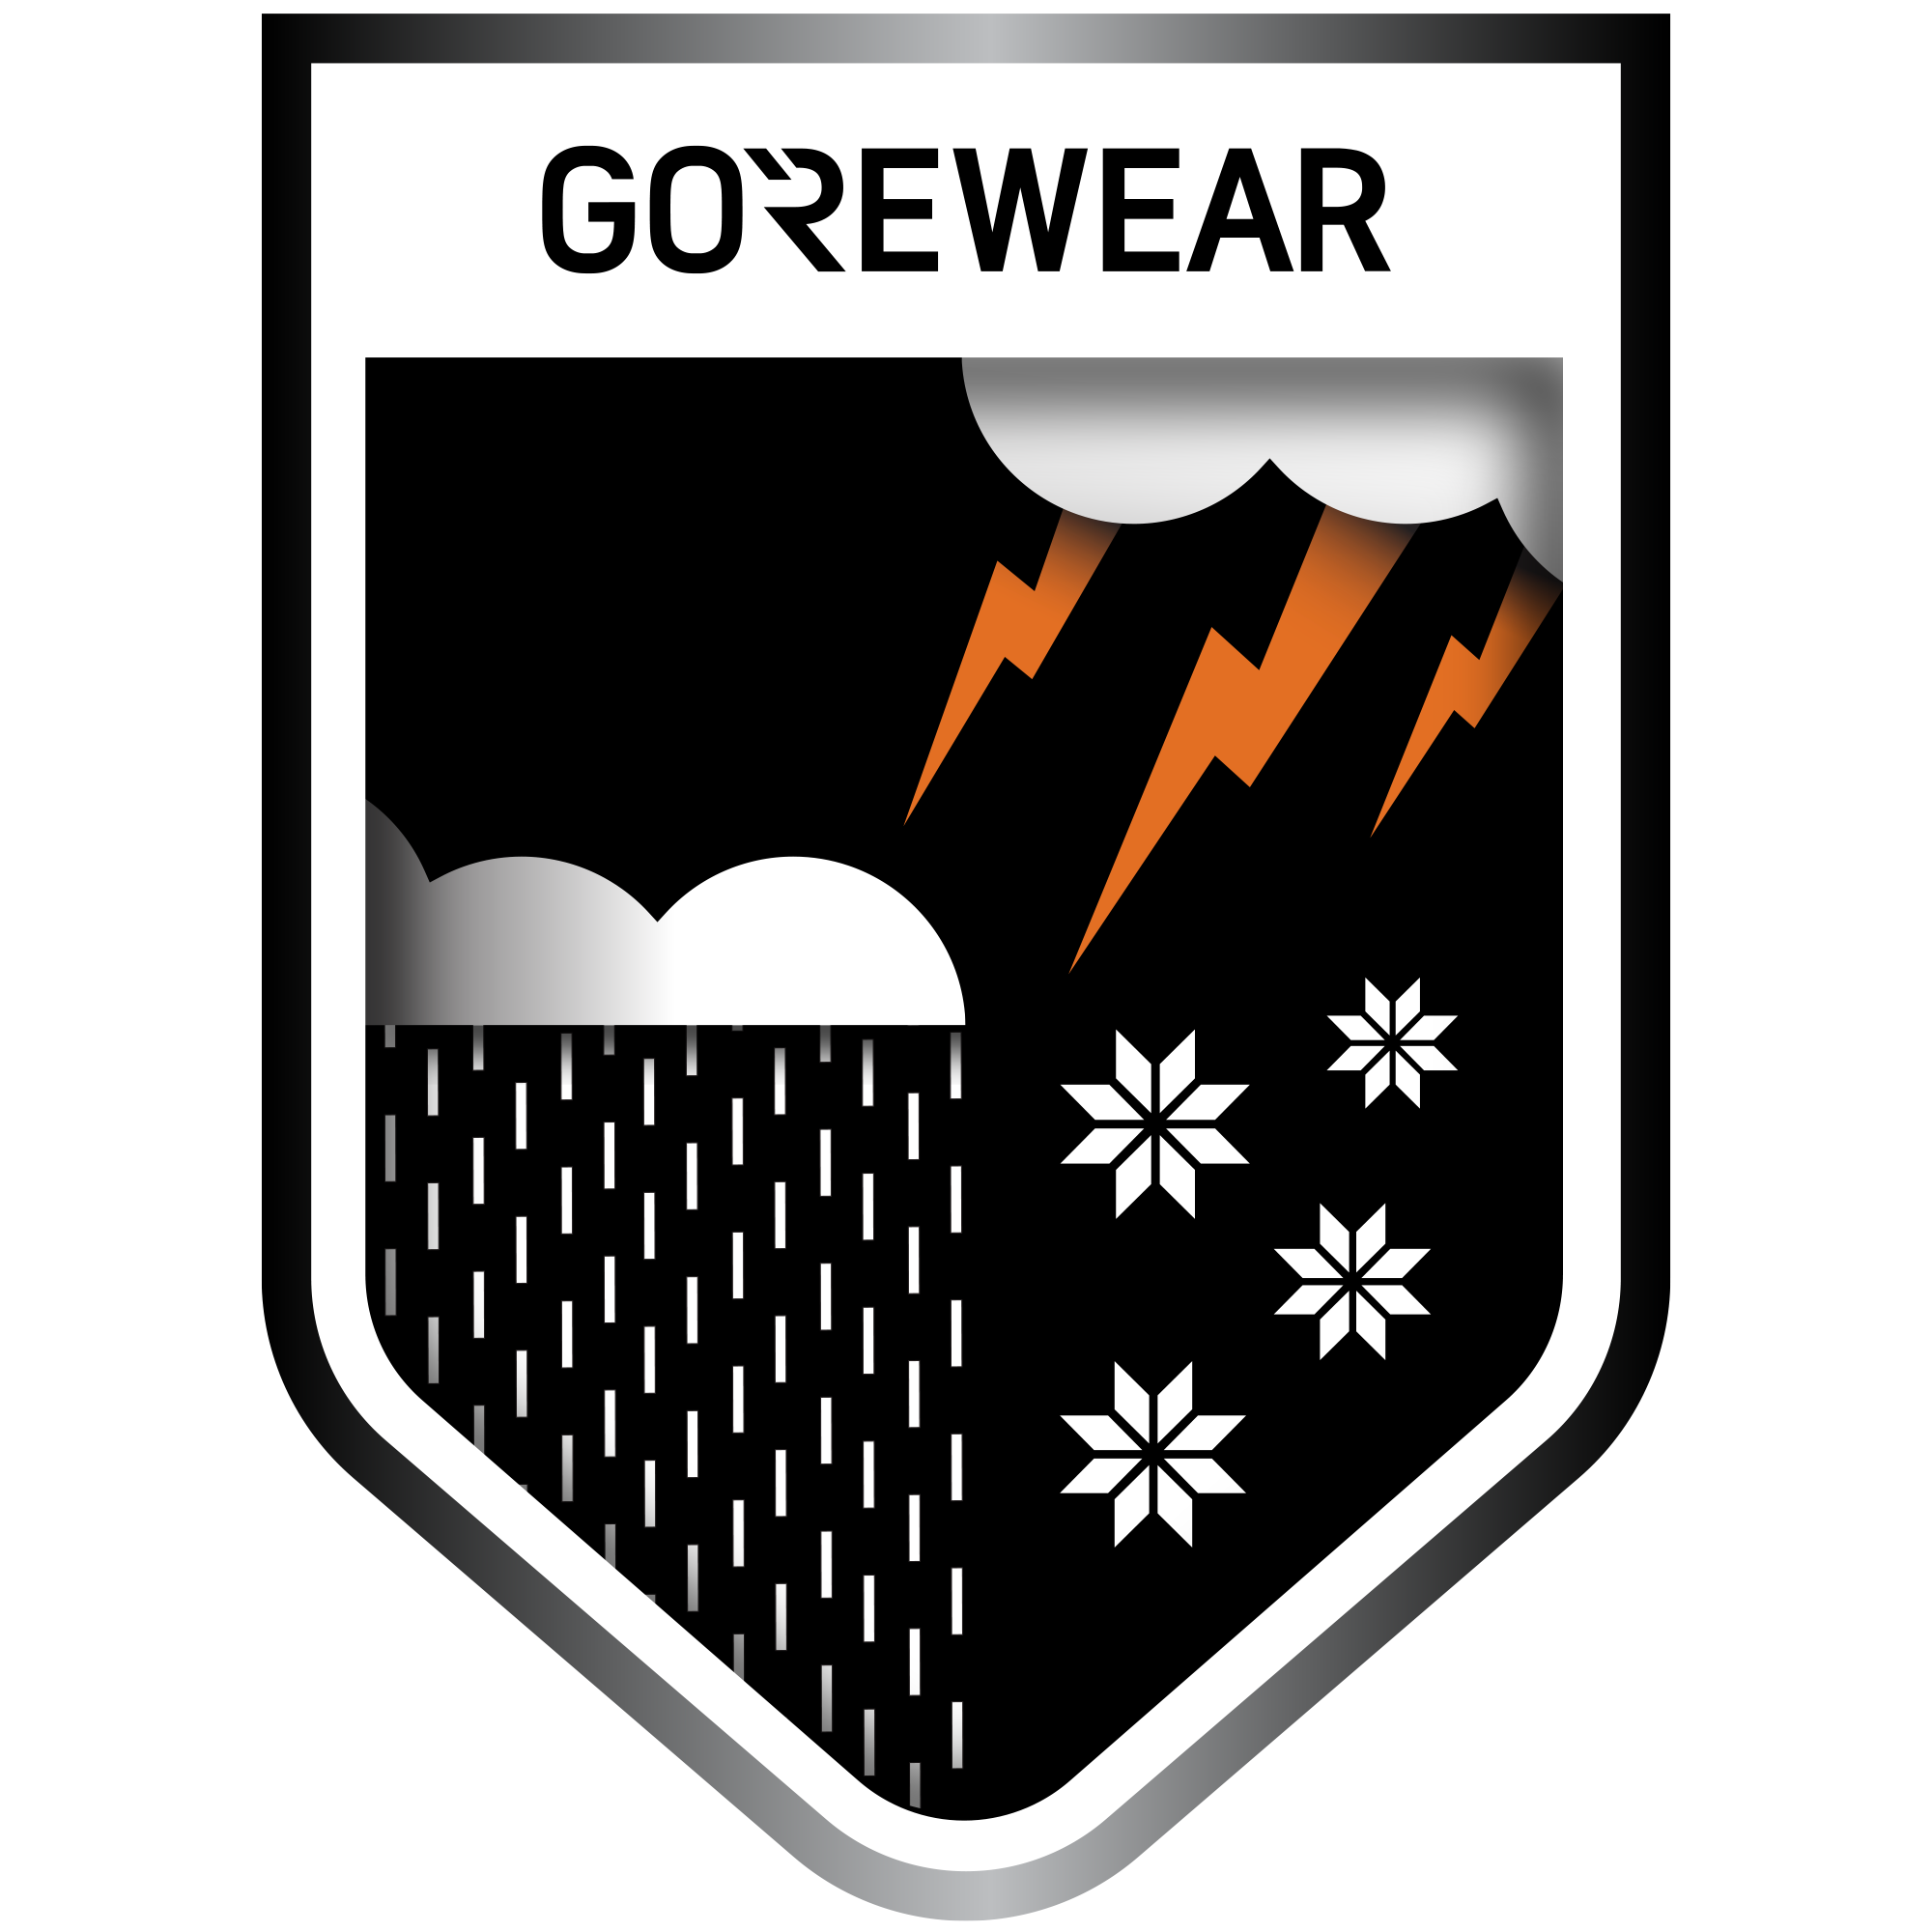 GOREWEAR Commit to All Conditions Challenge